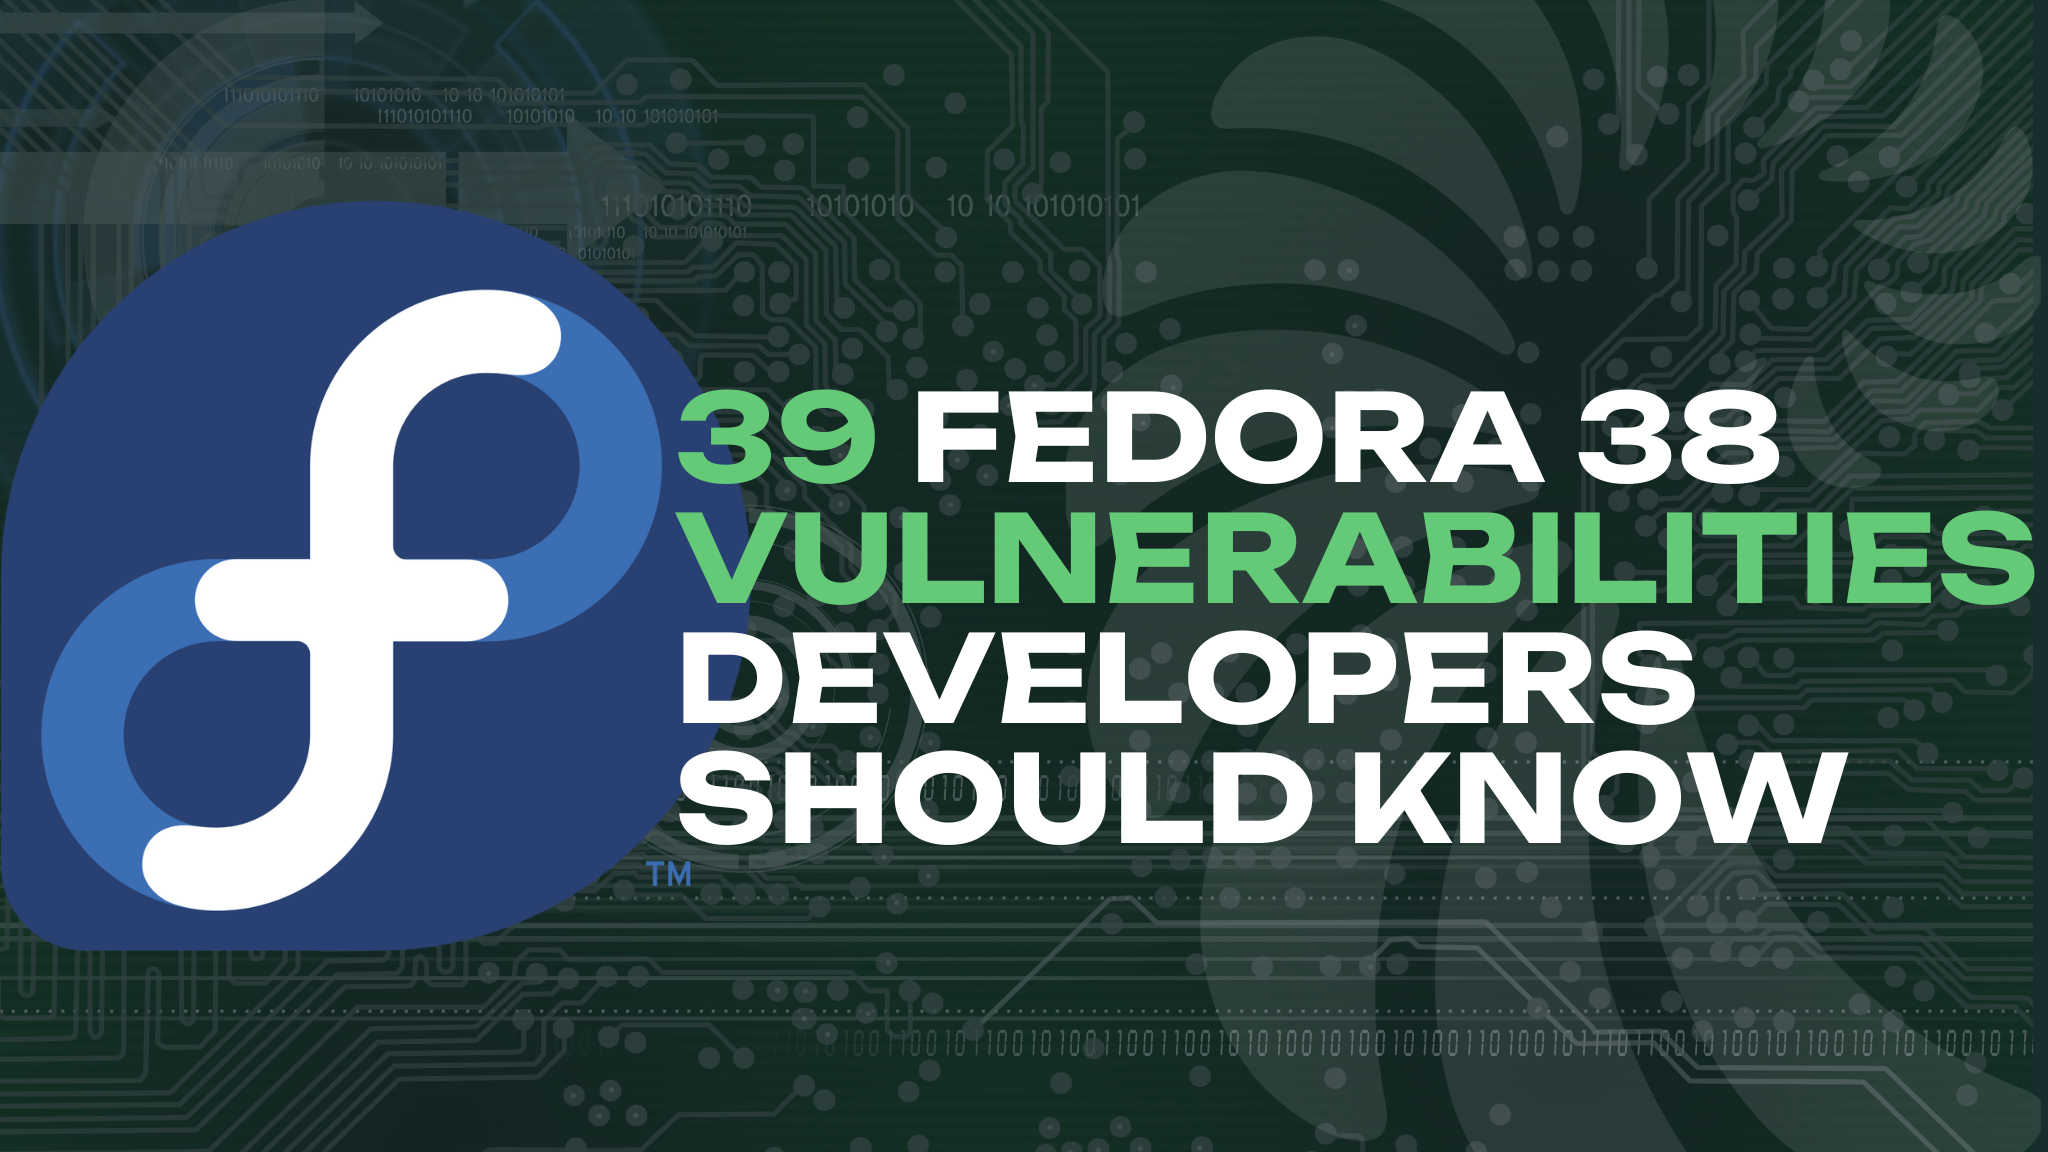 How to Upgrade to Fedora 39 from Fedora 38